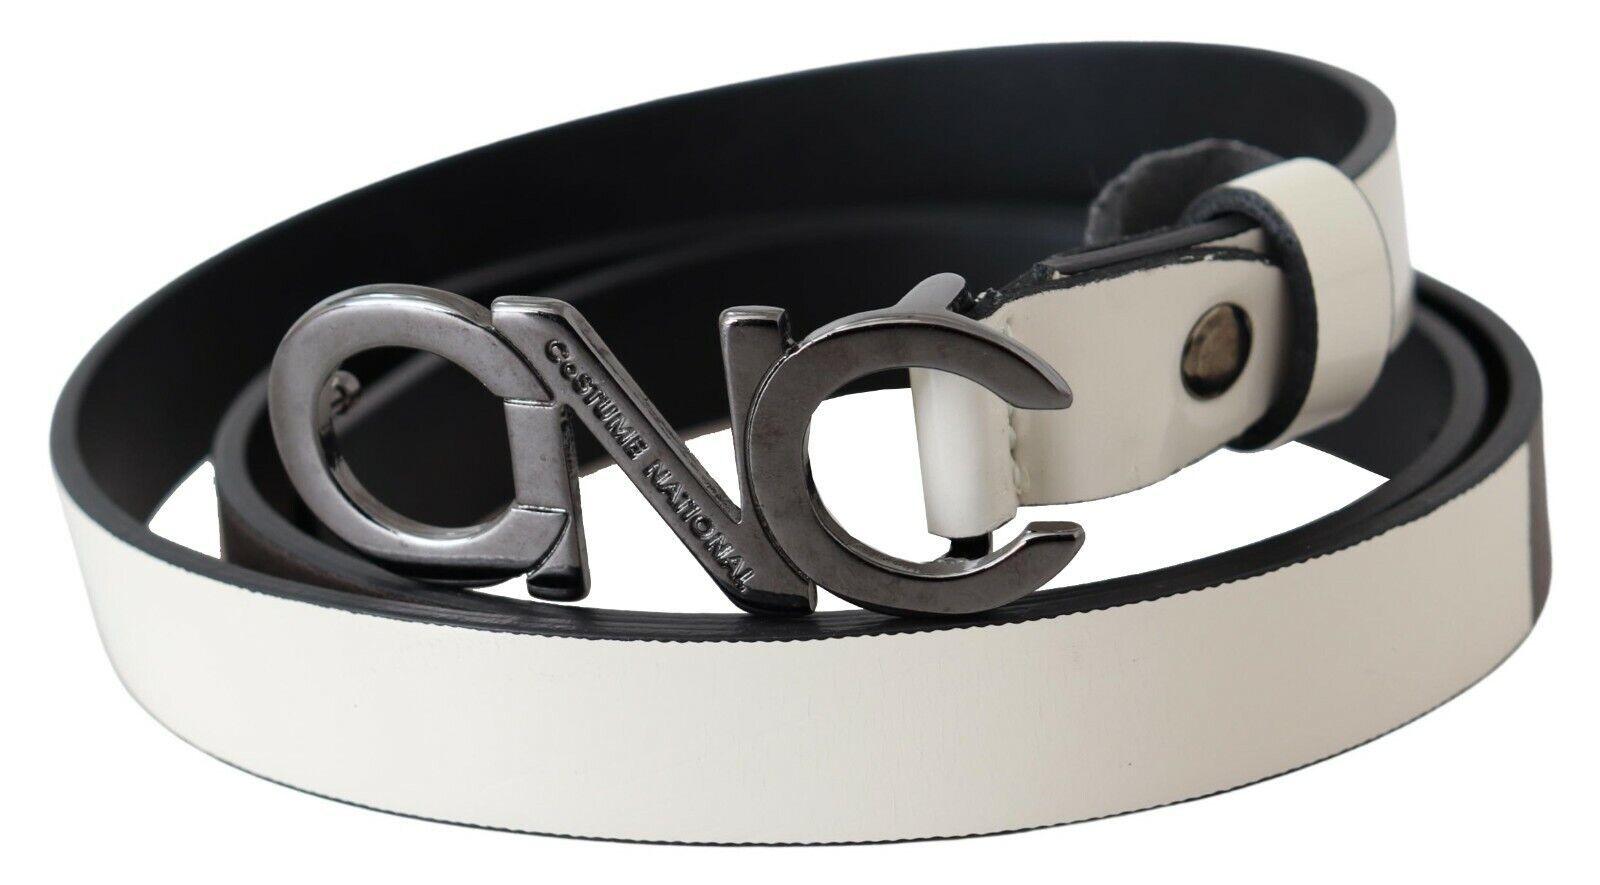 Belt Mettalic Gray Leather Logo Belt - Designed by Costume National Available to Buy at a Discounted Price on Moon Behind The Hill Online Designer Discount Store